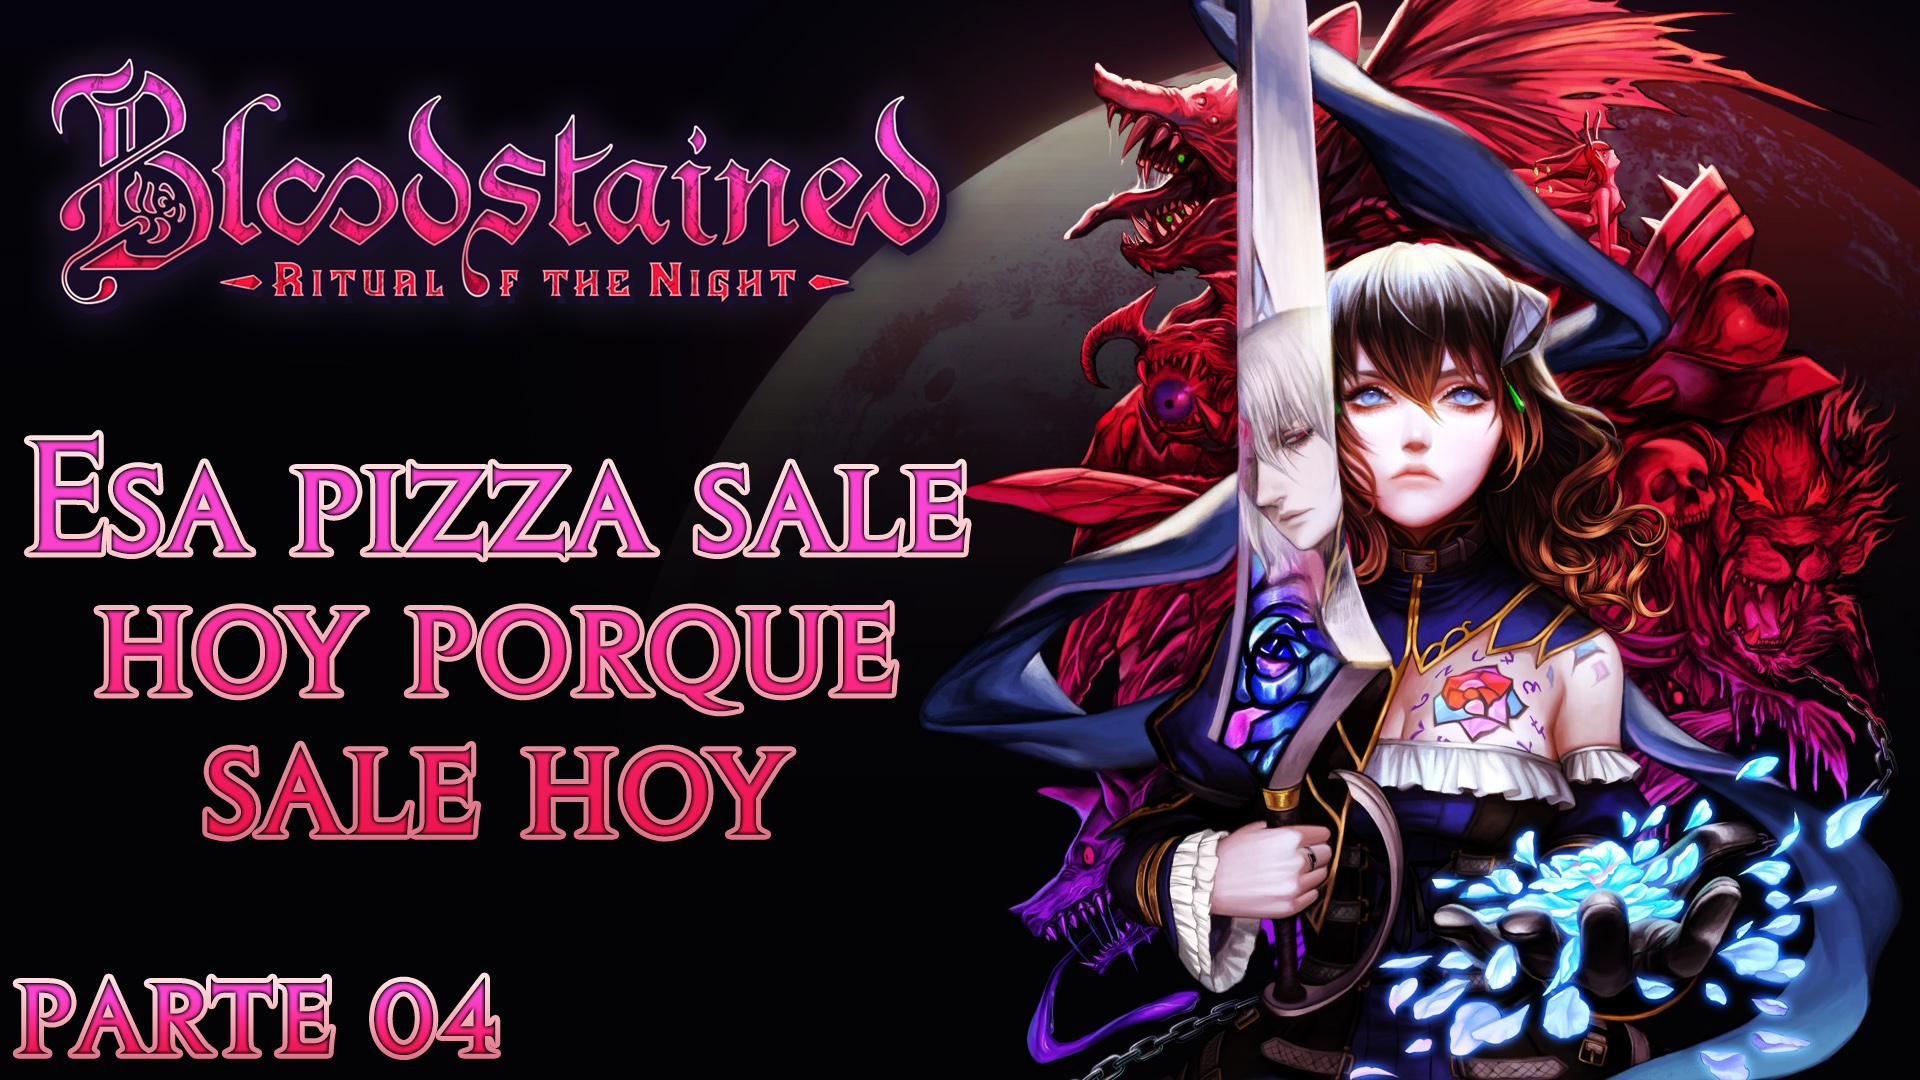 Serie Bloodstained Ritual of the Night #4 – Esa pizza sale hoy porque sale hoy